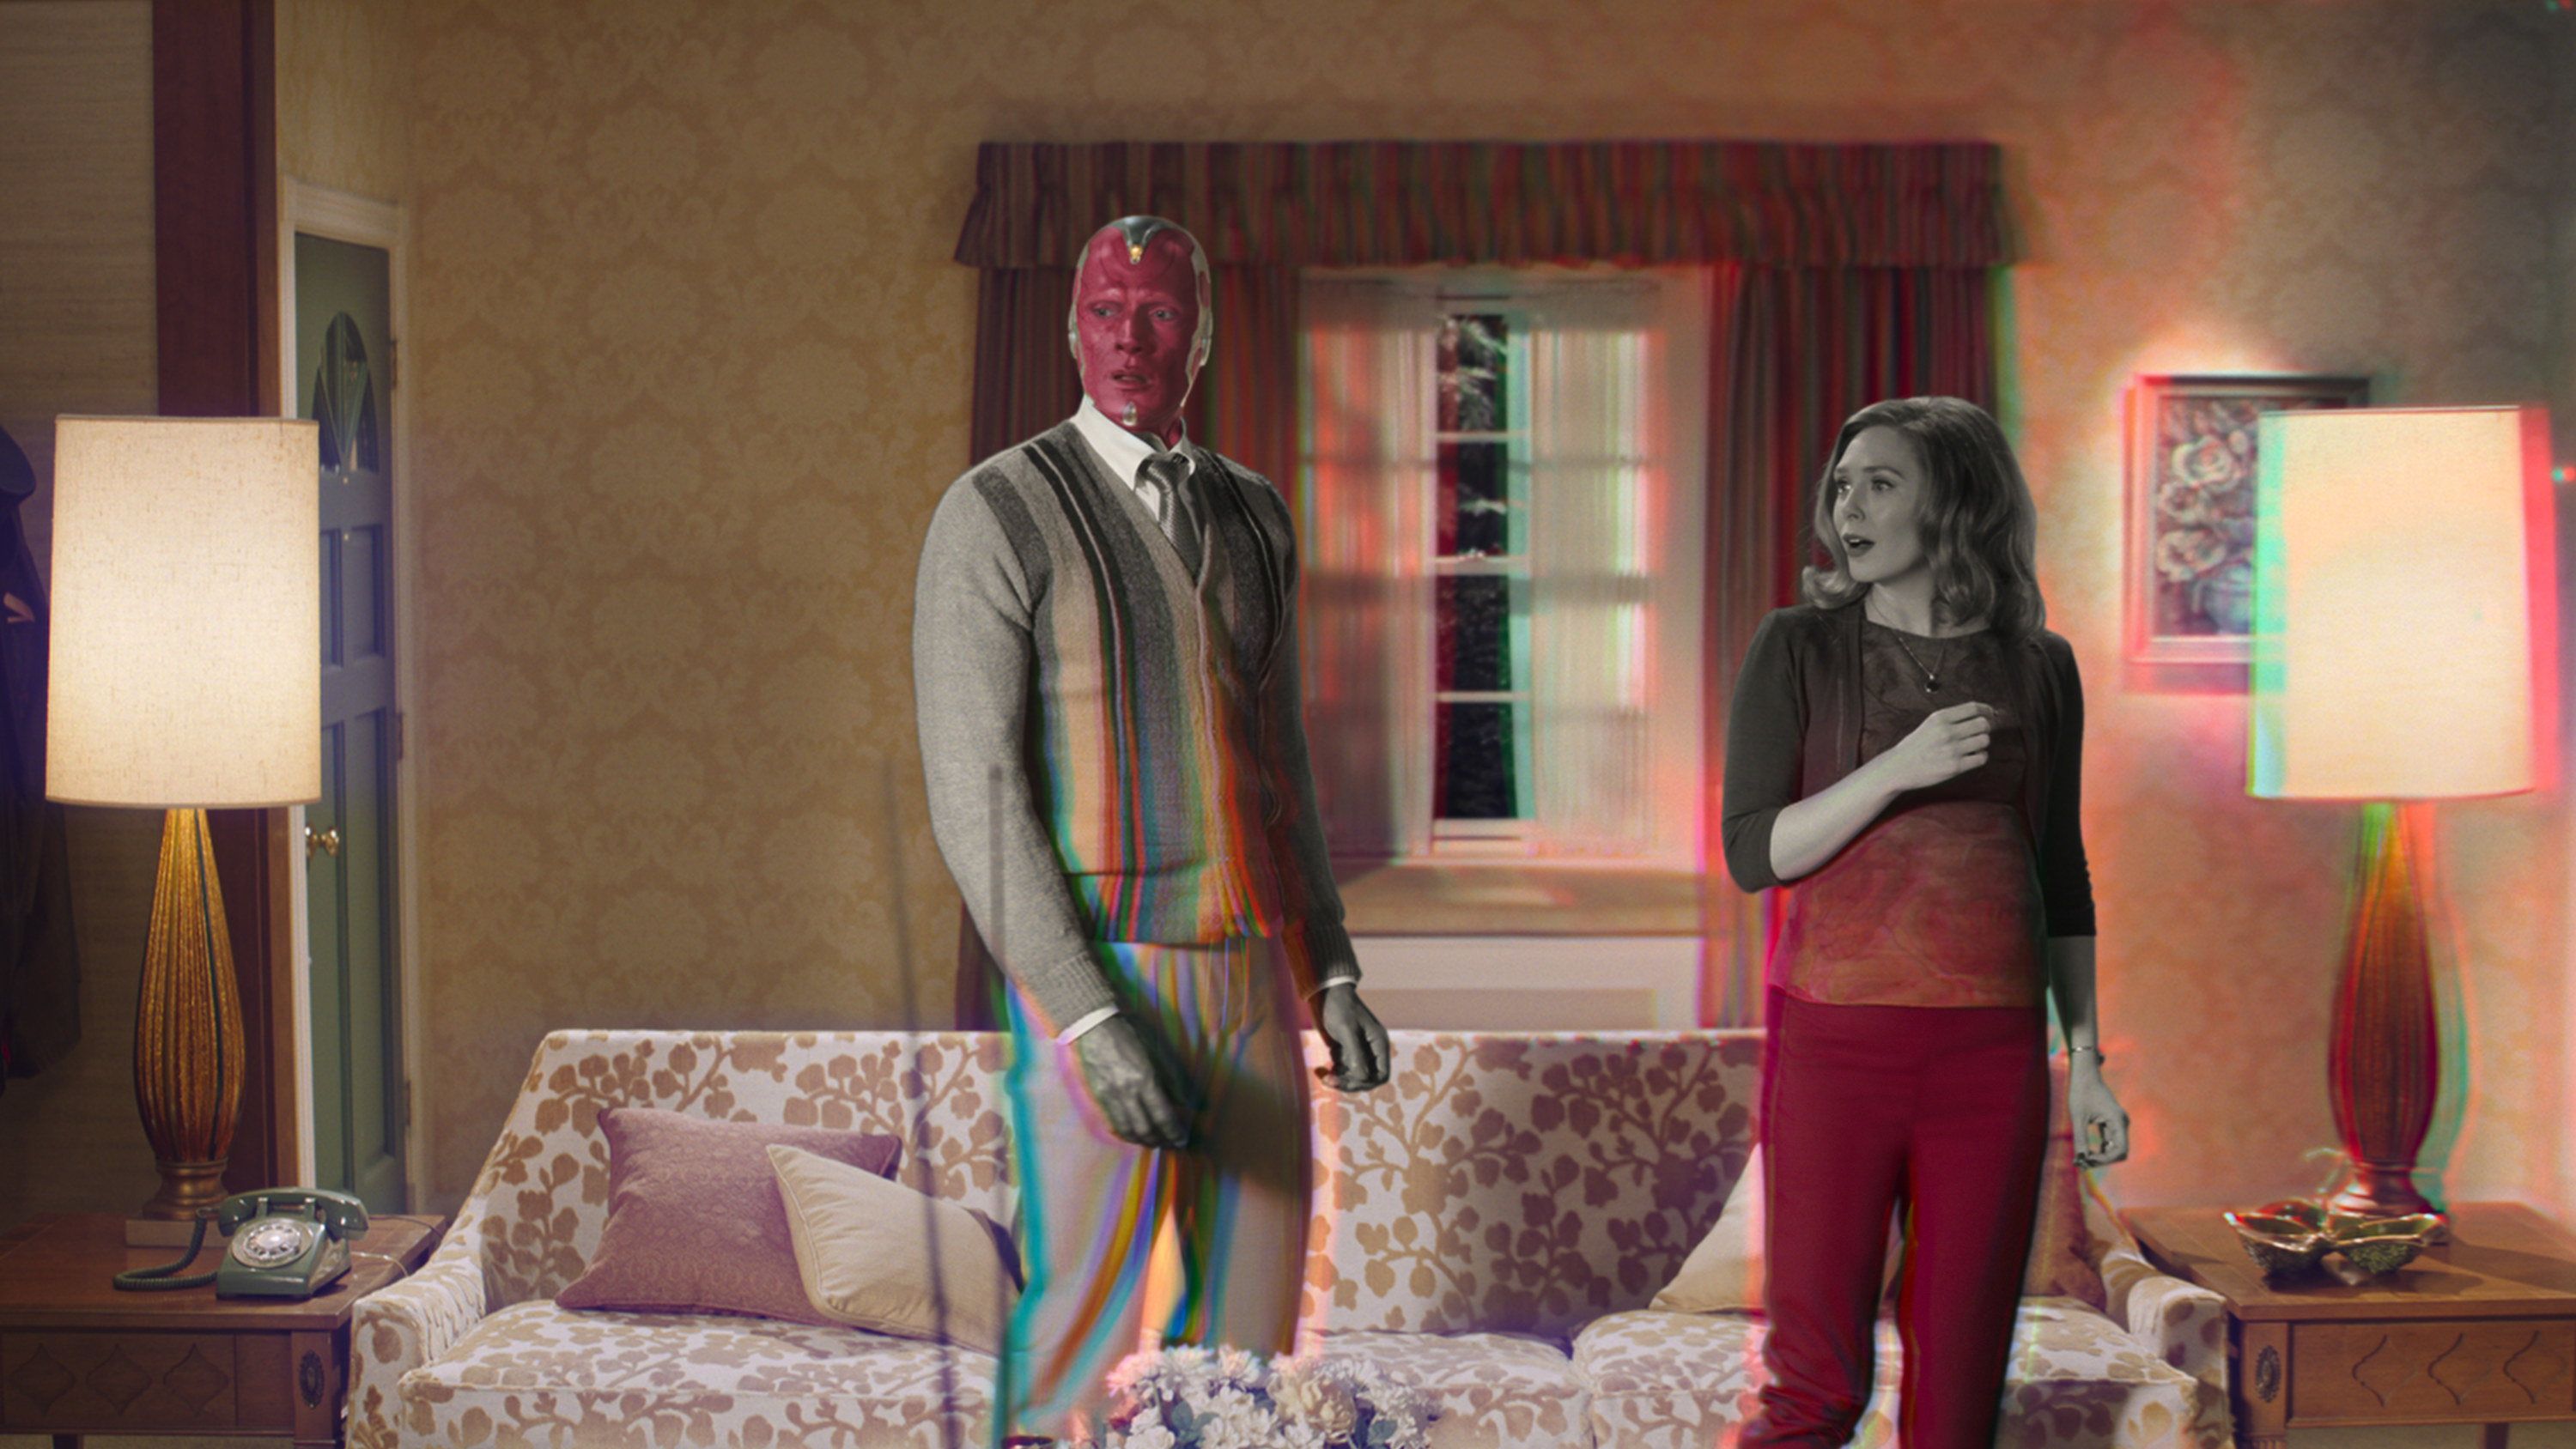 Vision and Wanda standing in a living room